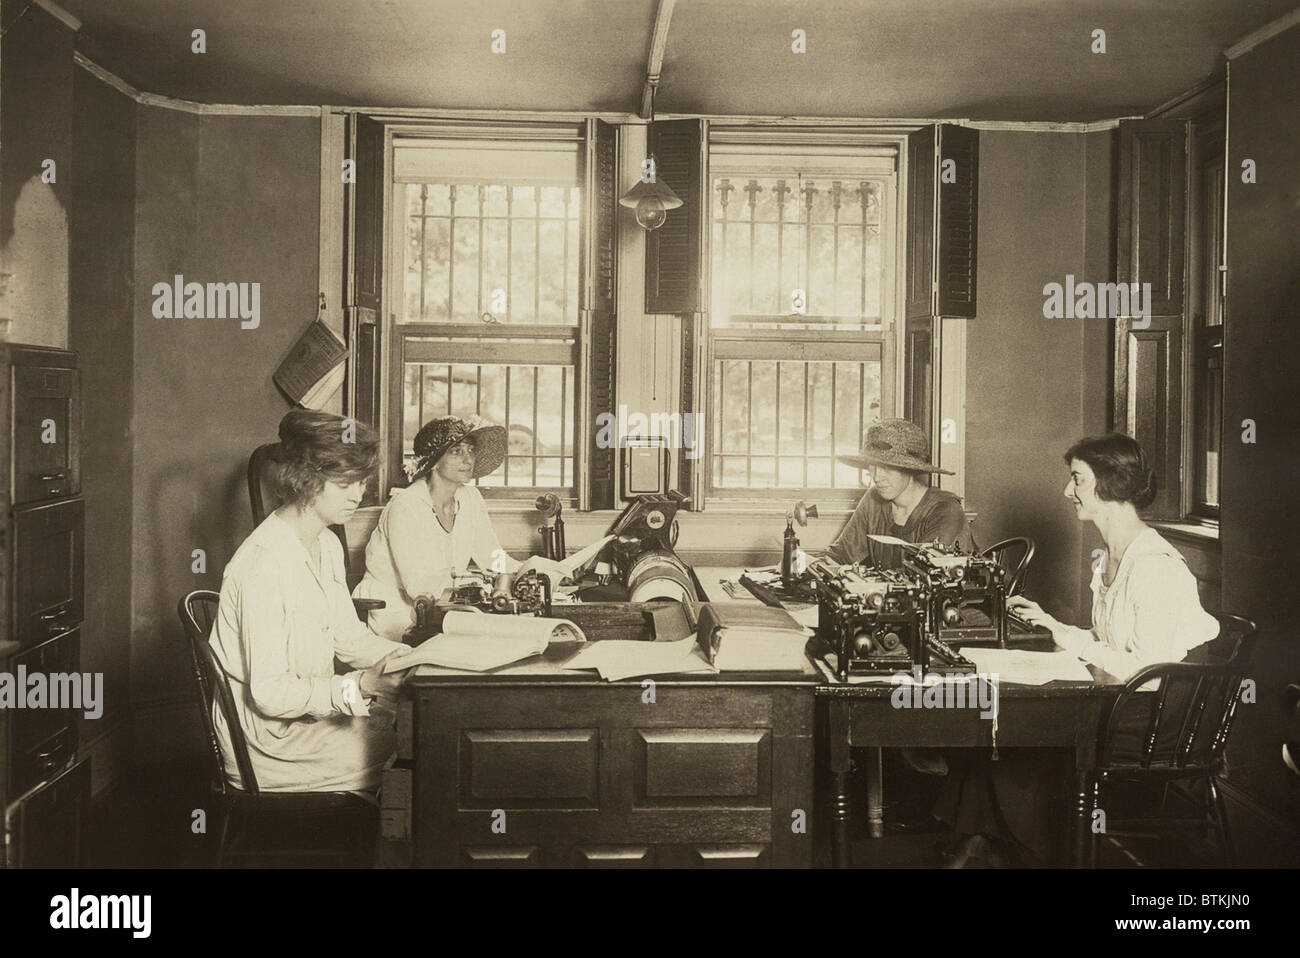 National Women's Party Press Room at their Washington. D.C. headquarters. Lead by Alice Paul, the NWP conducted increasingly militant protests demanding votes for women. Ca. 1915. Stock Photo